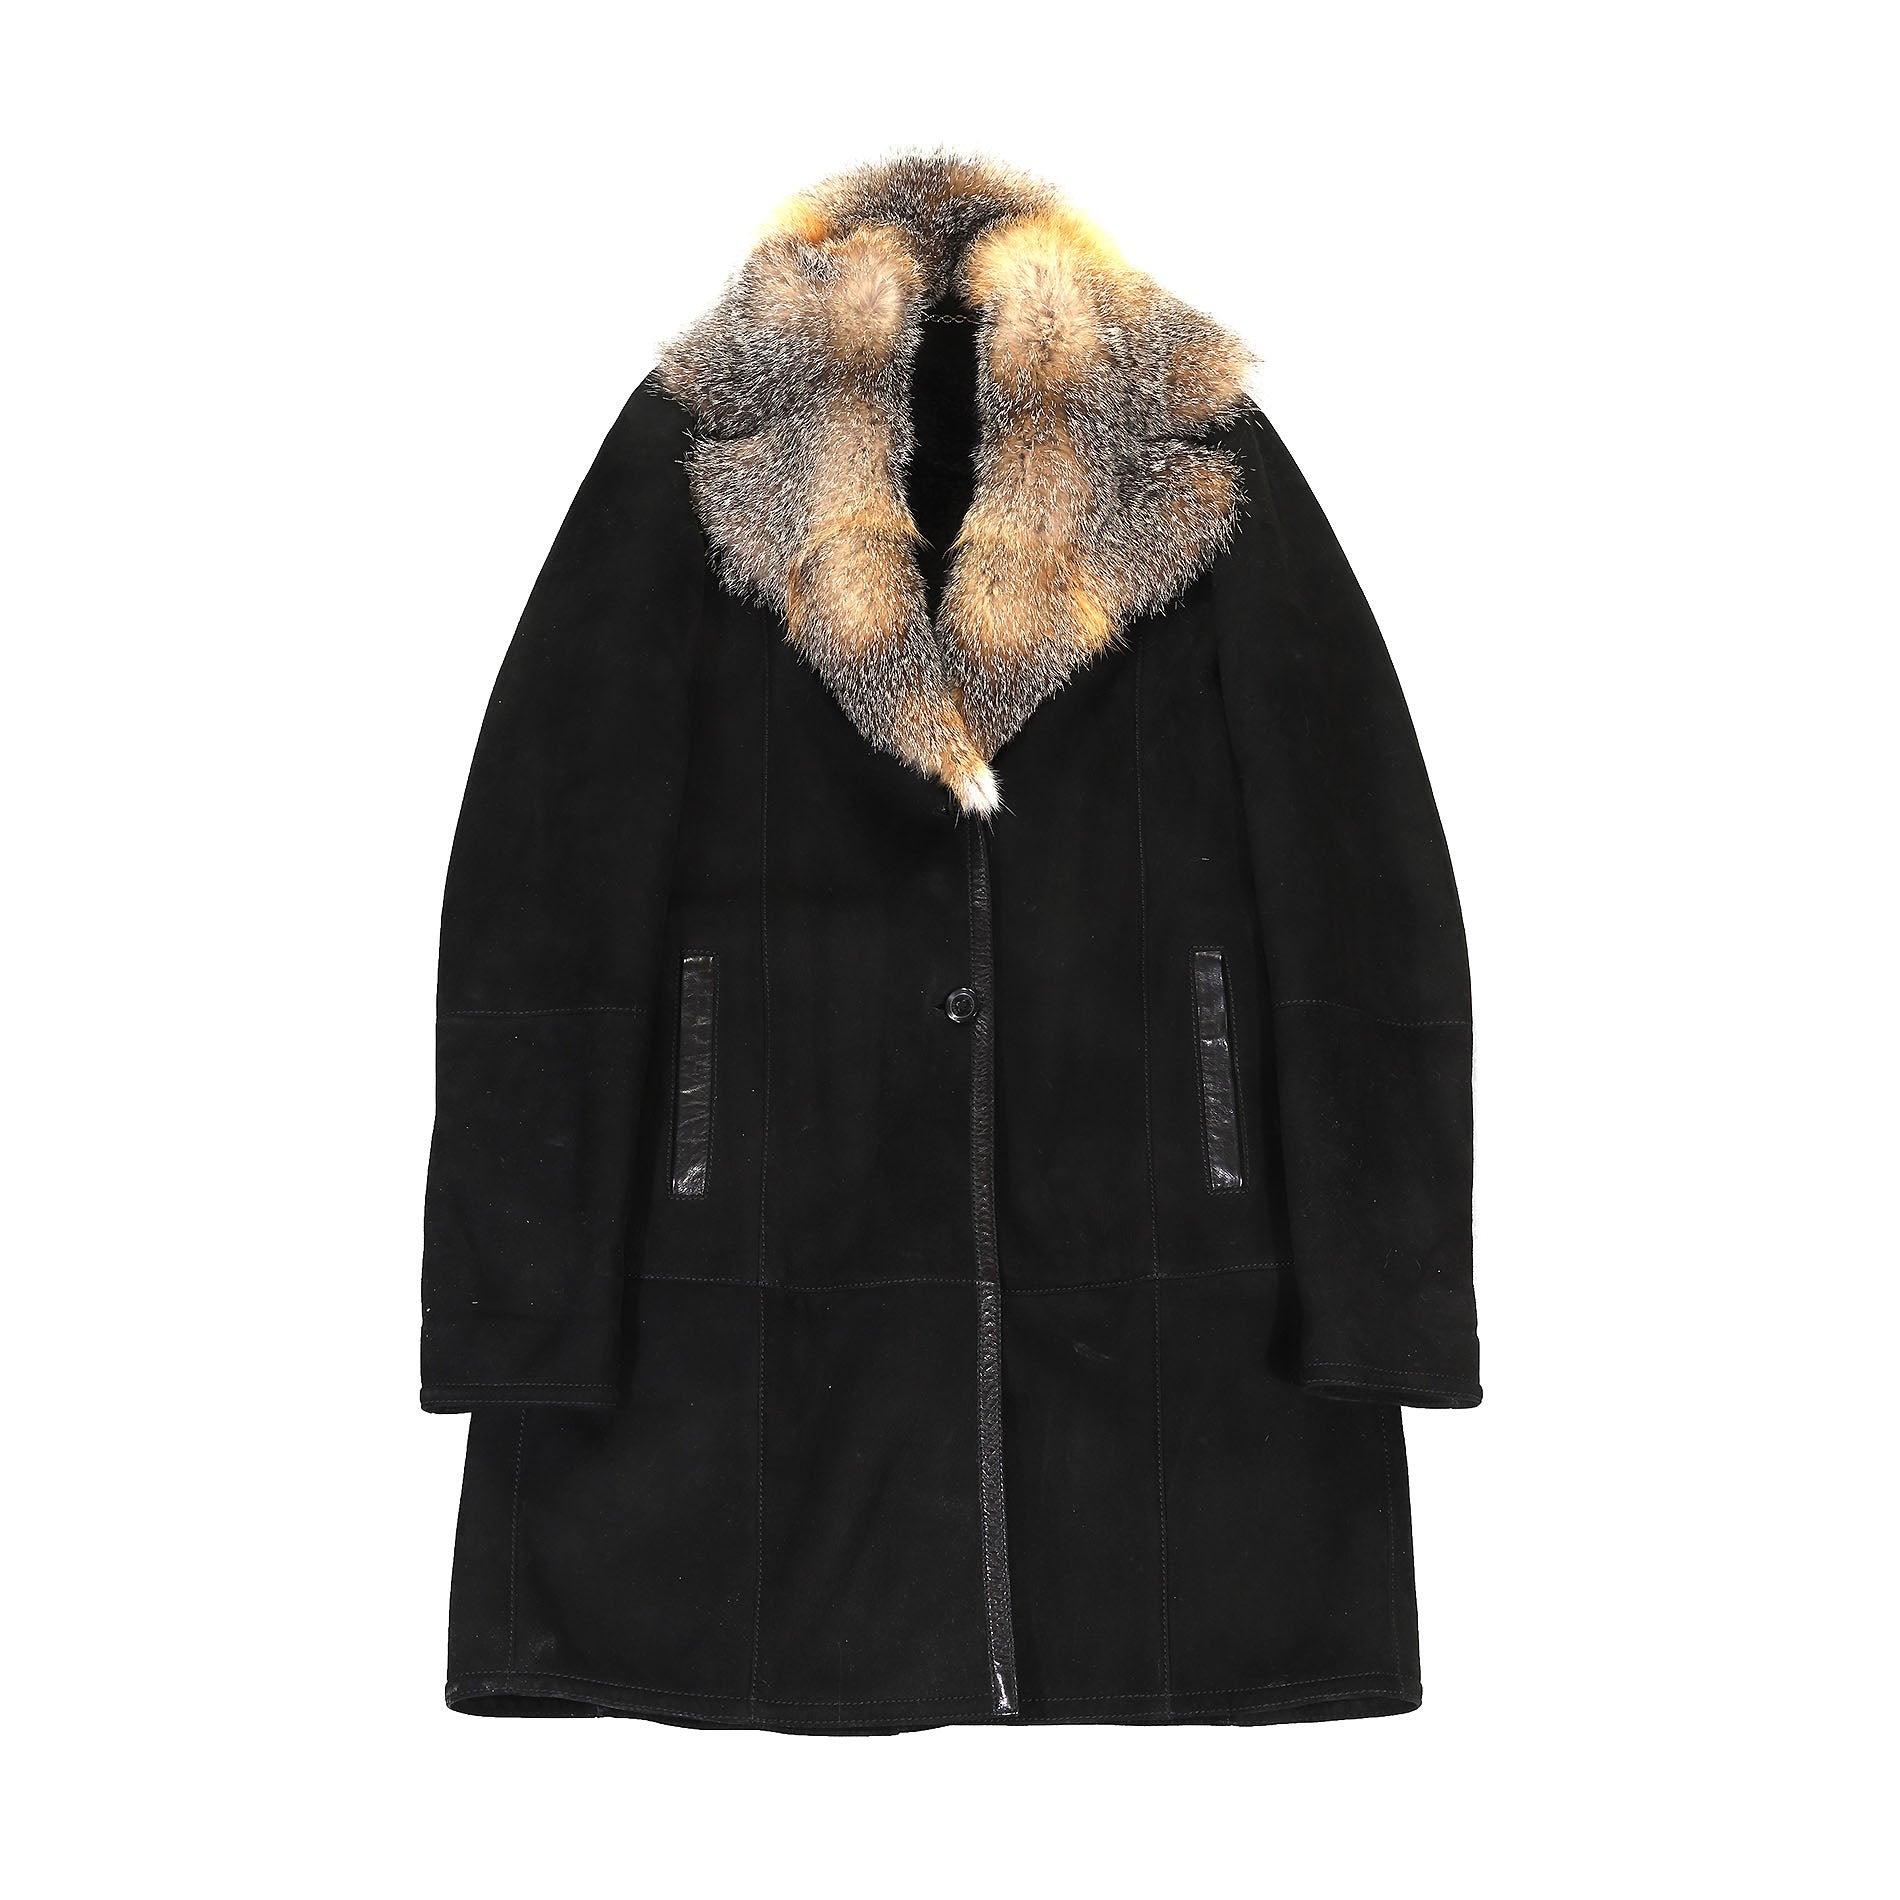 Gucci 90s by Tom Ford Black Shearling Fur Collar Coat